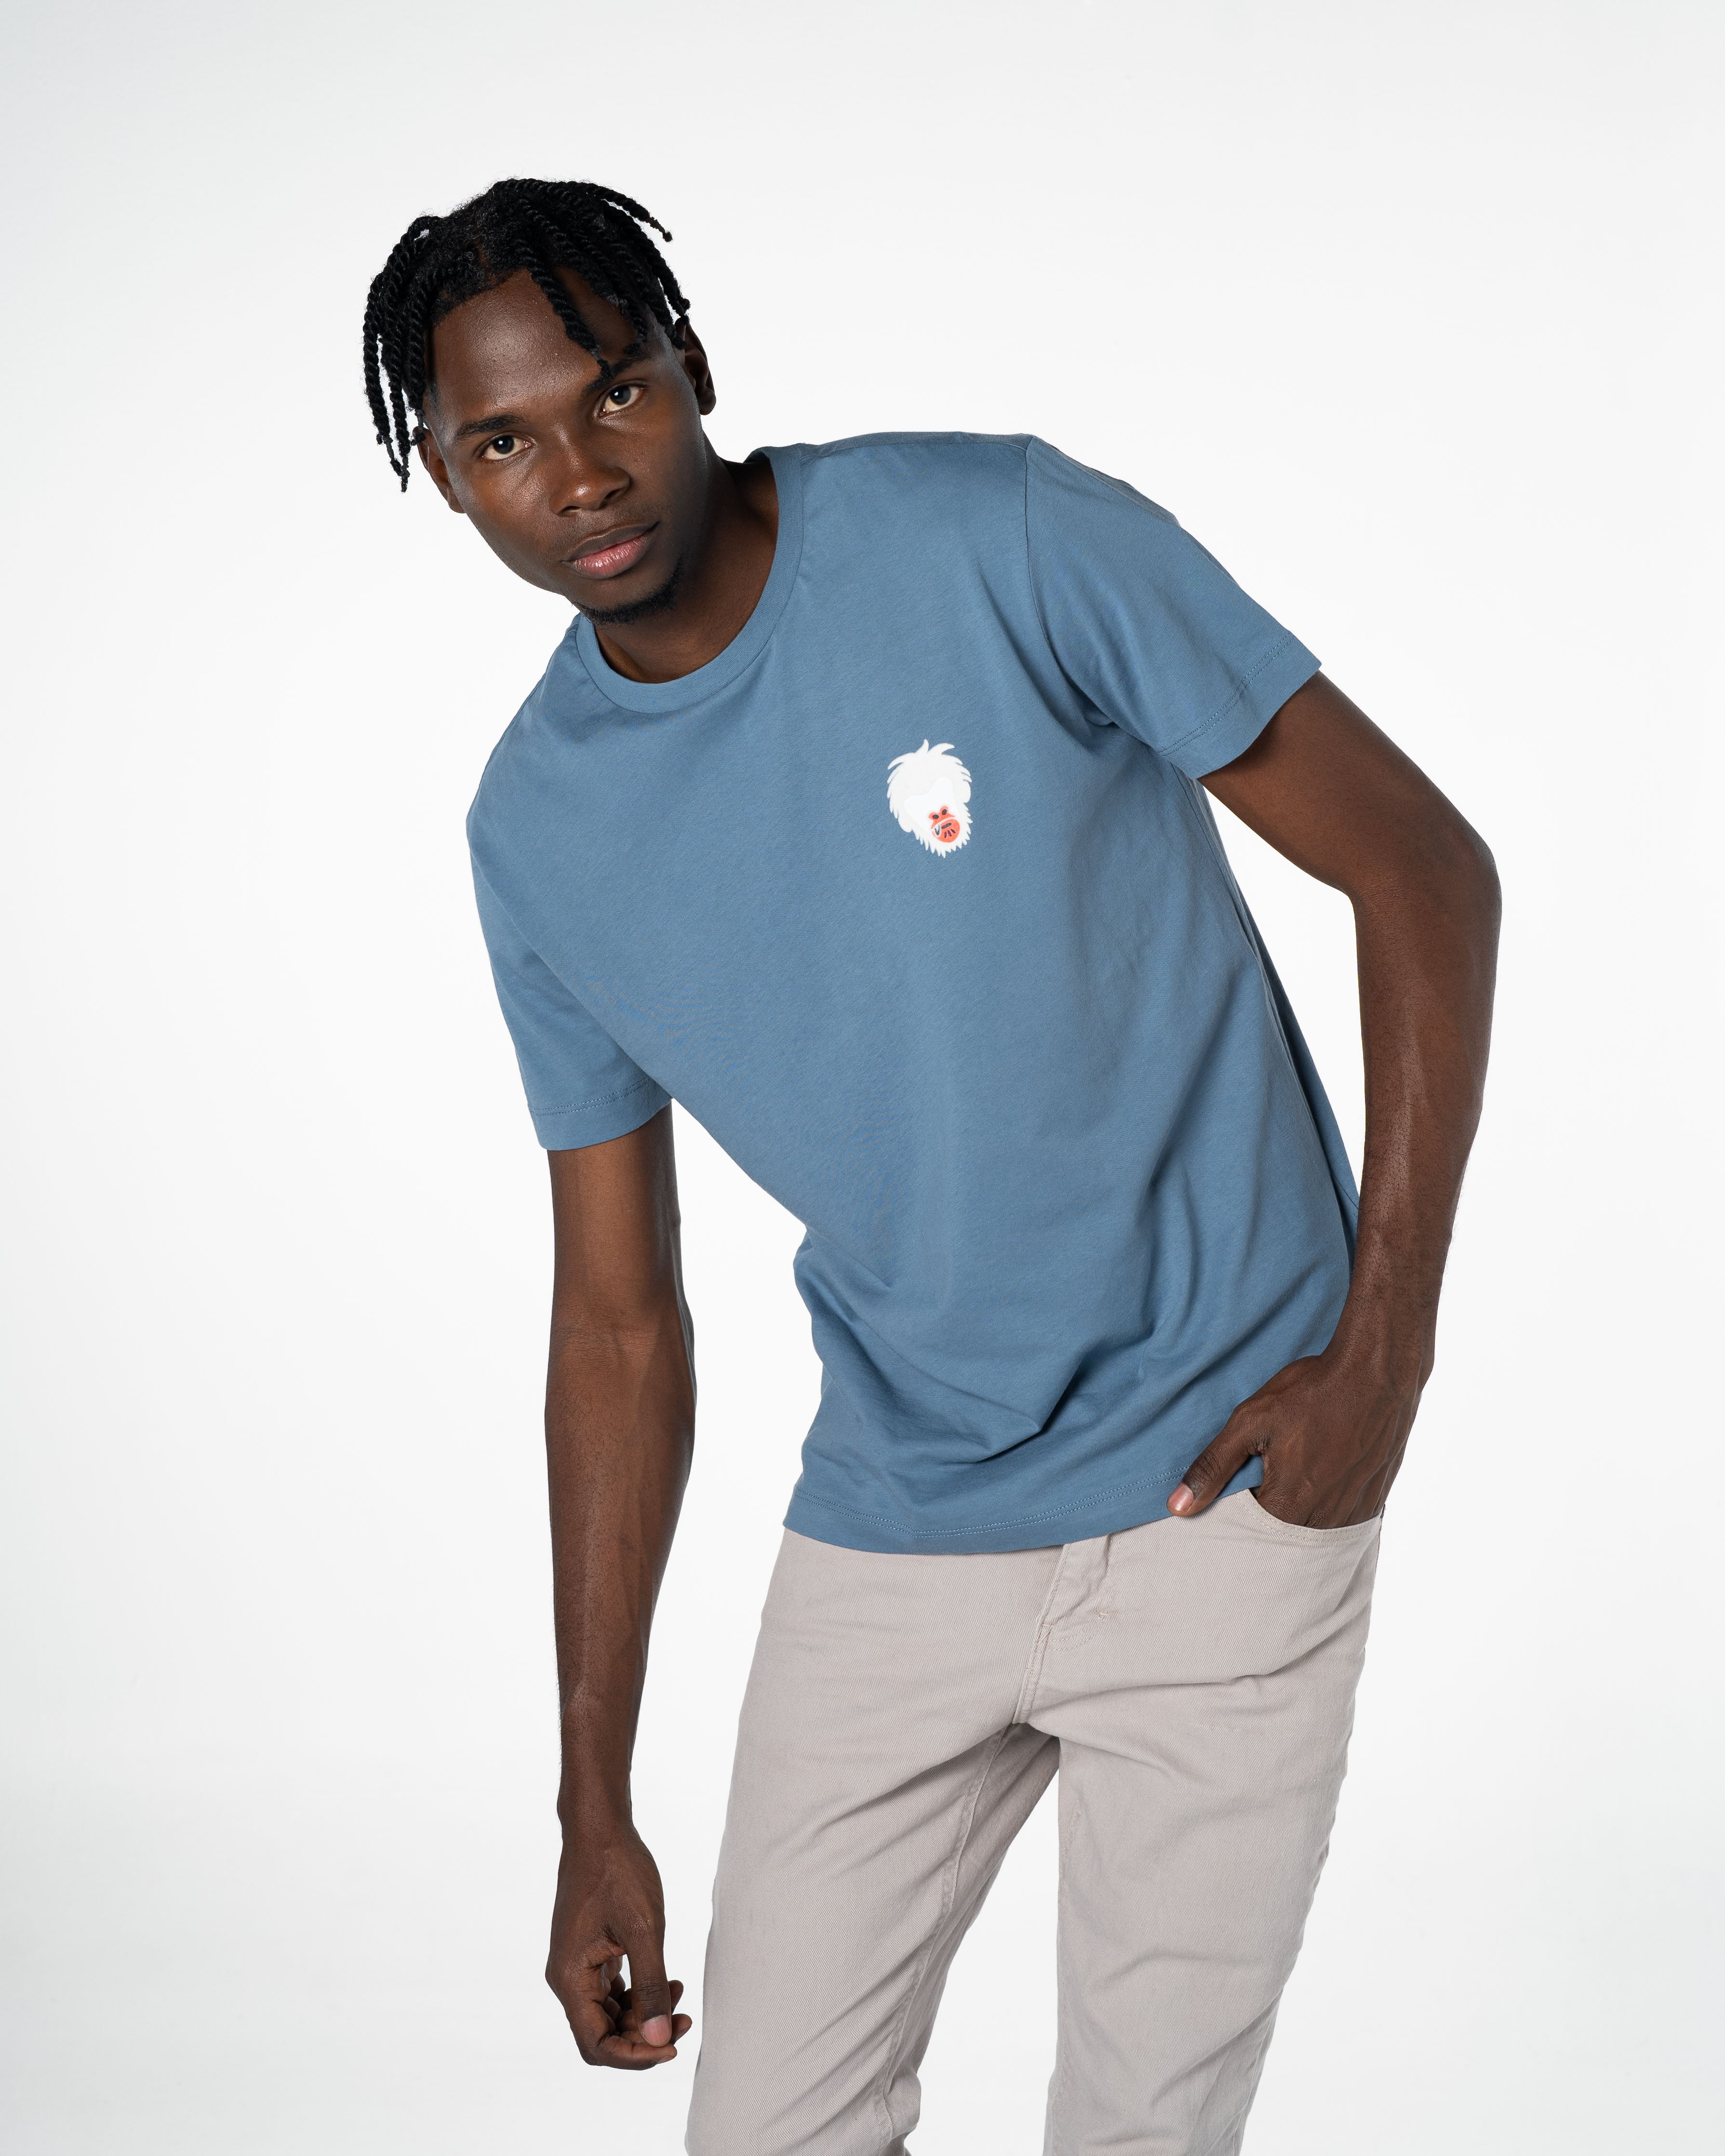 30% OFF Playera Algodón Hombre T-shirt Ghost Collection